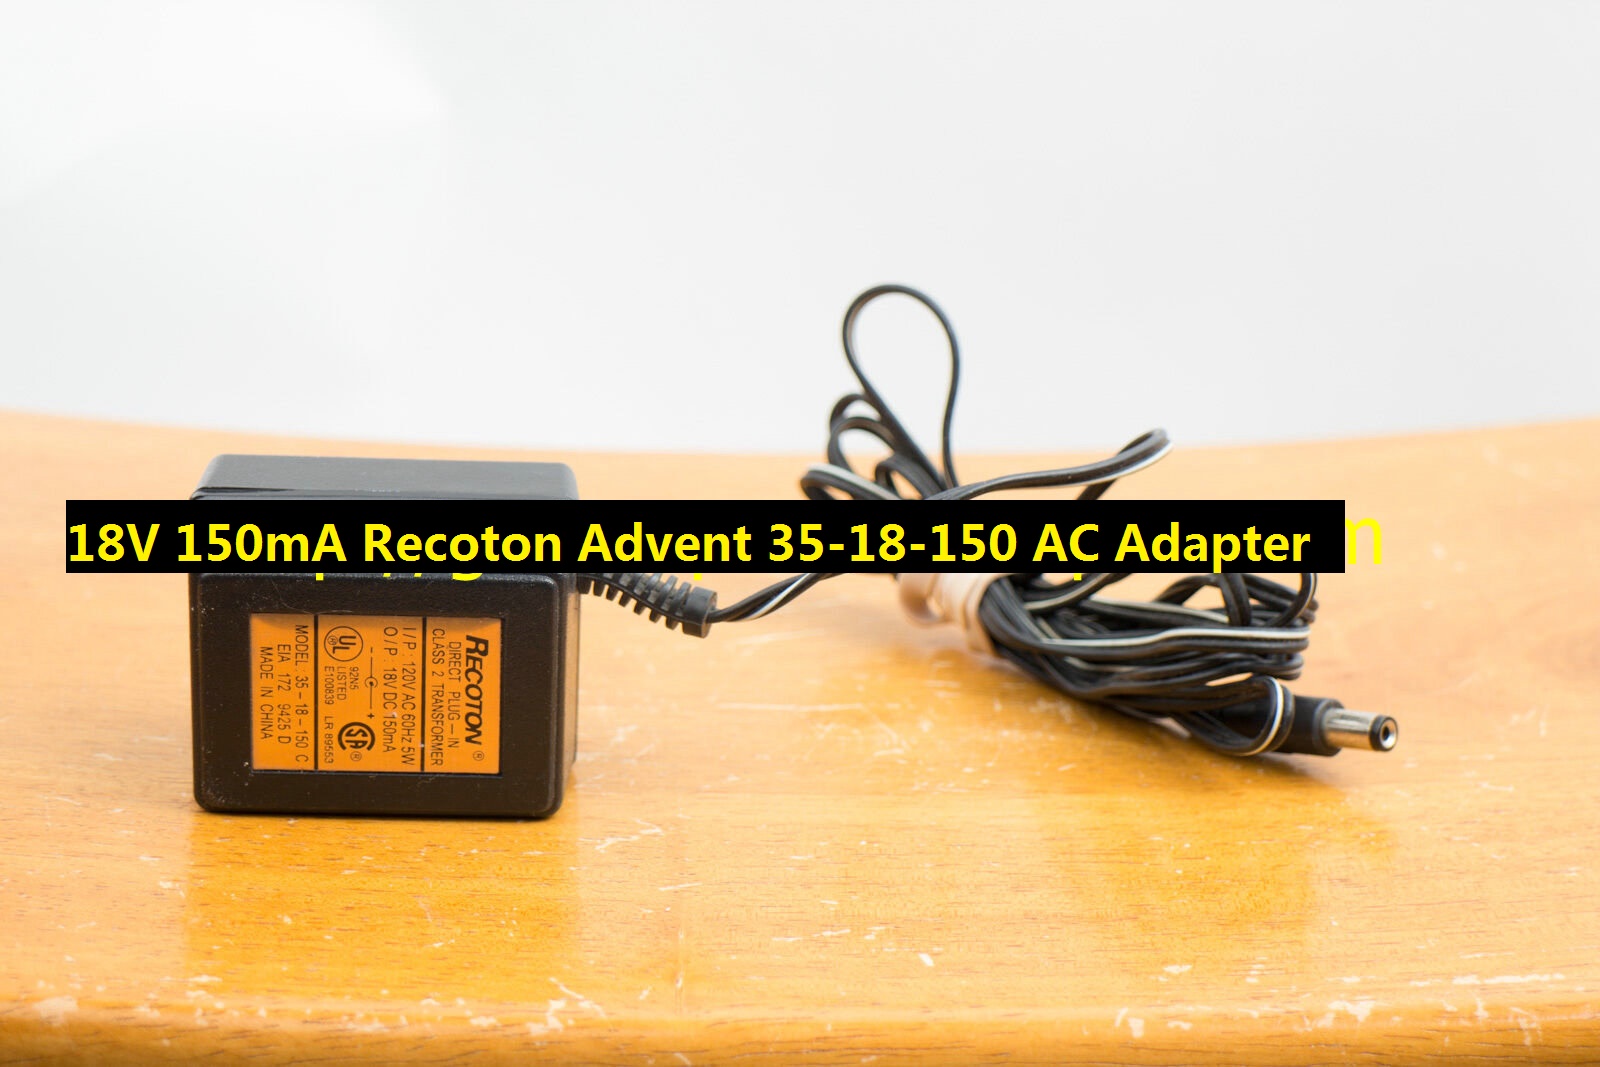 *100% Brand NEW* Recoton Advent 35-18-150 C Direct Plug In Class 2 Transformer 18V 150mA AC Adapter